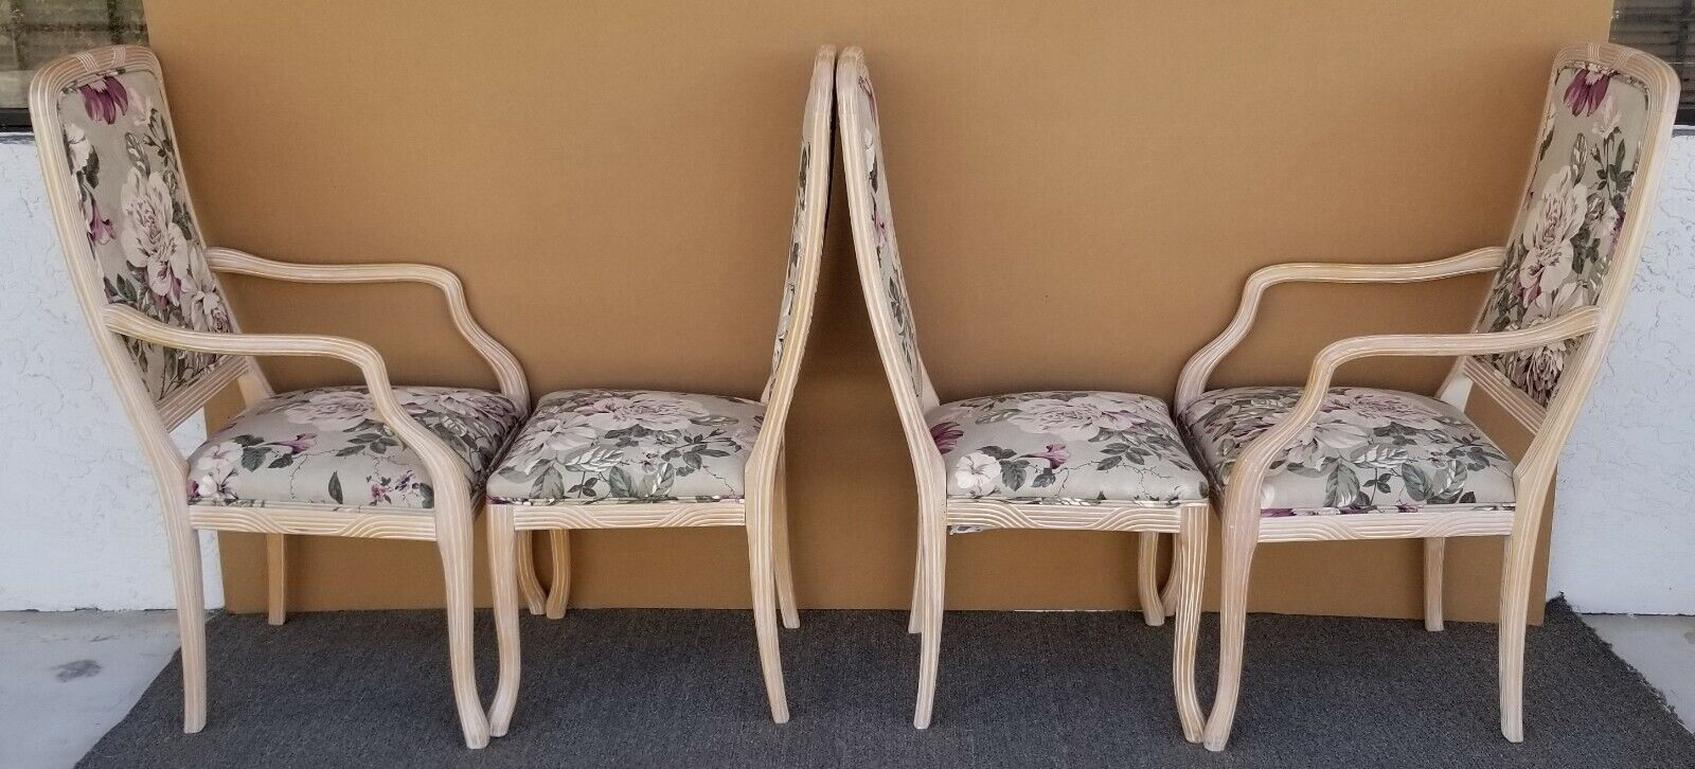 Chintz Roses Dining Chairs, Set of 4 In Good Condition For Sale In Lake Worth, FL